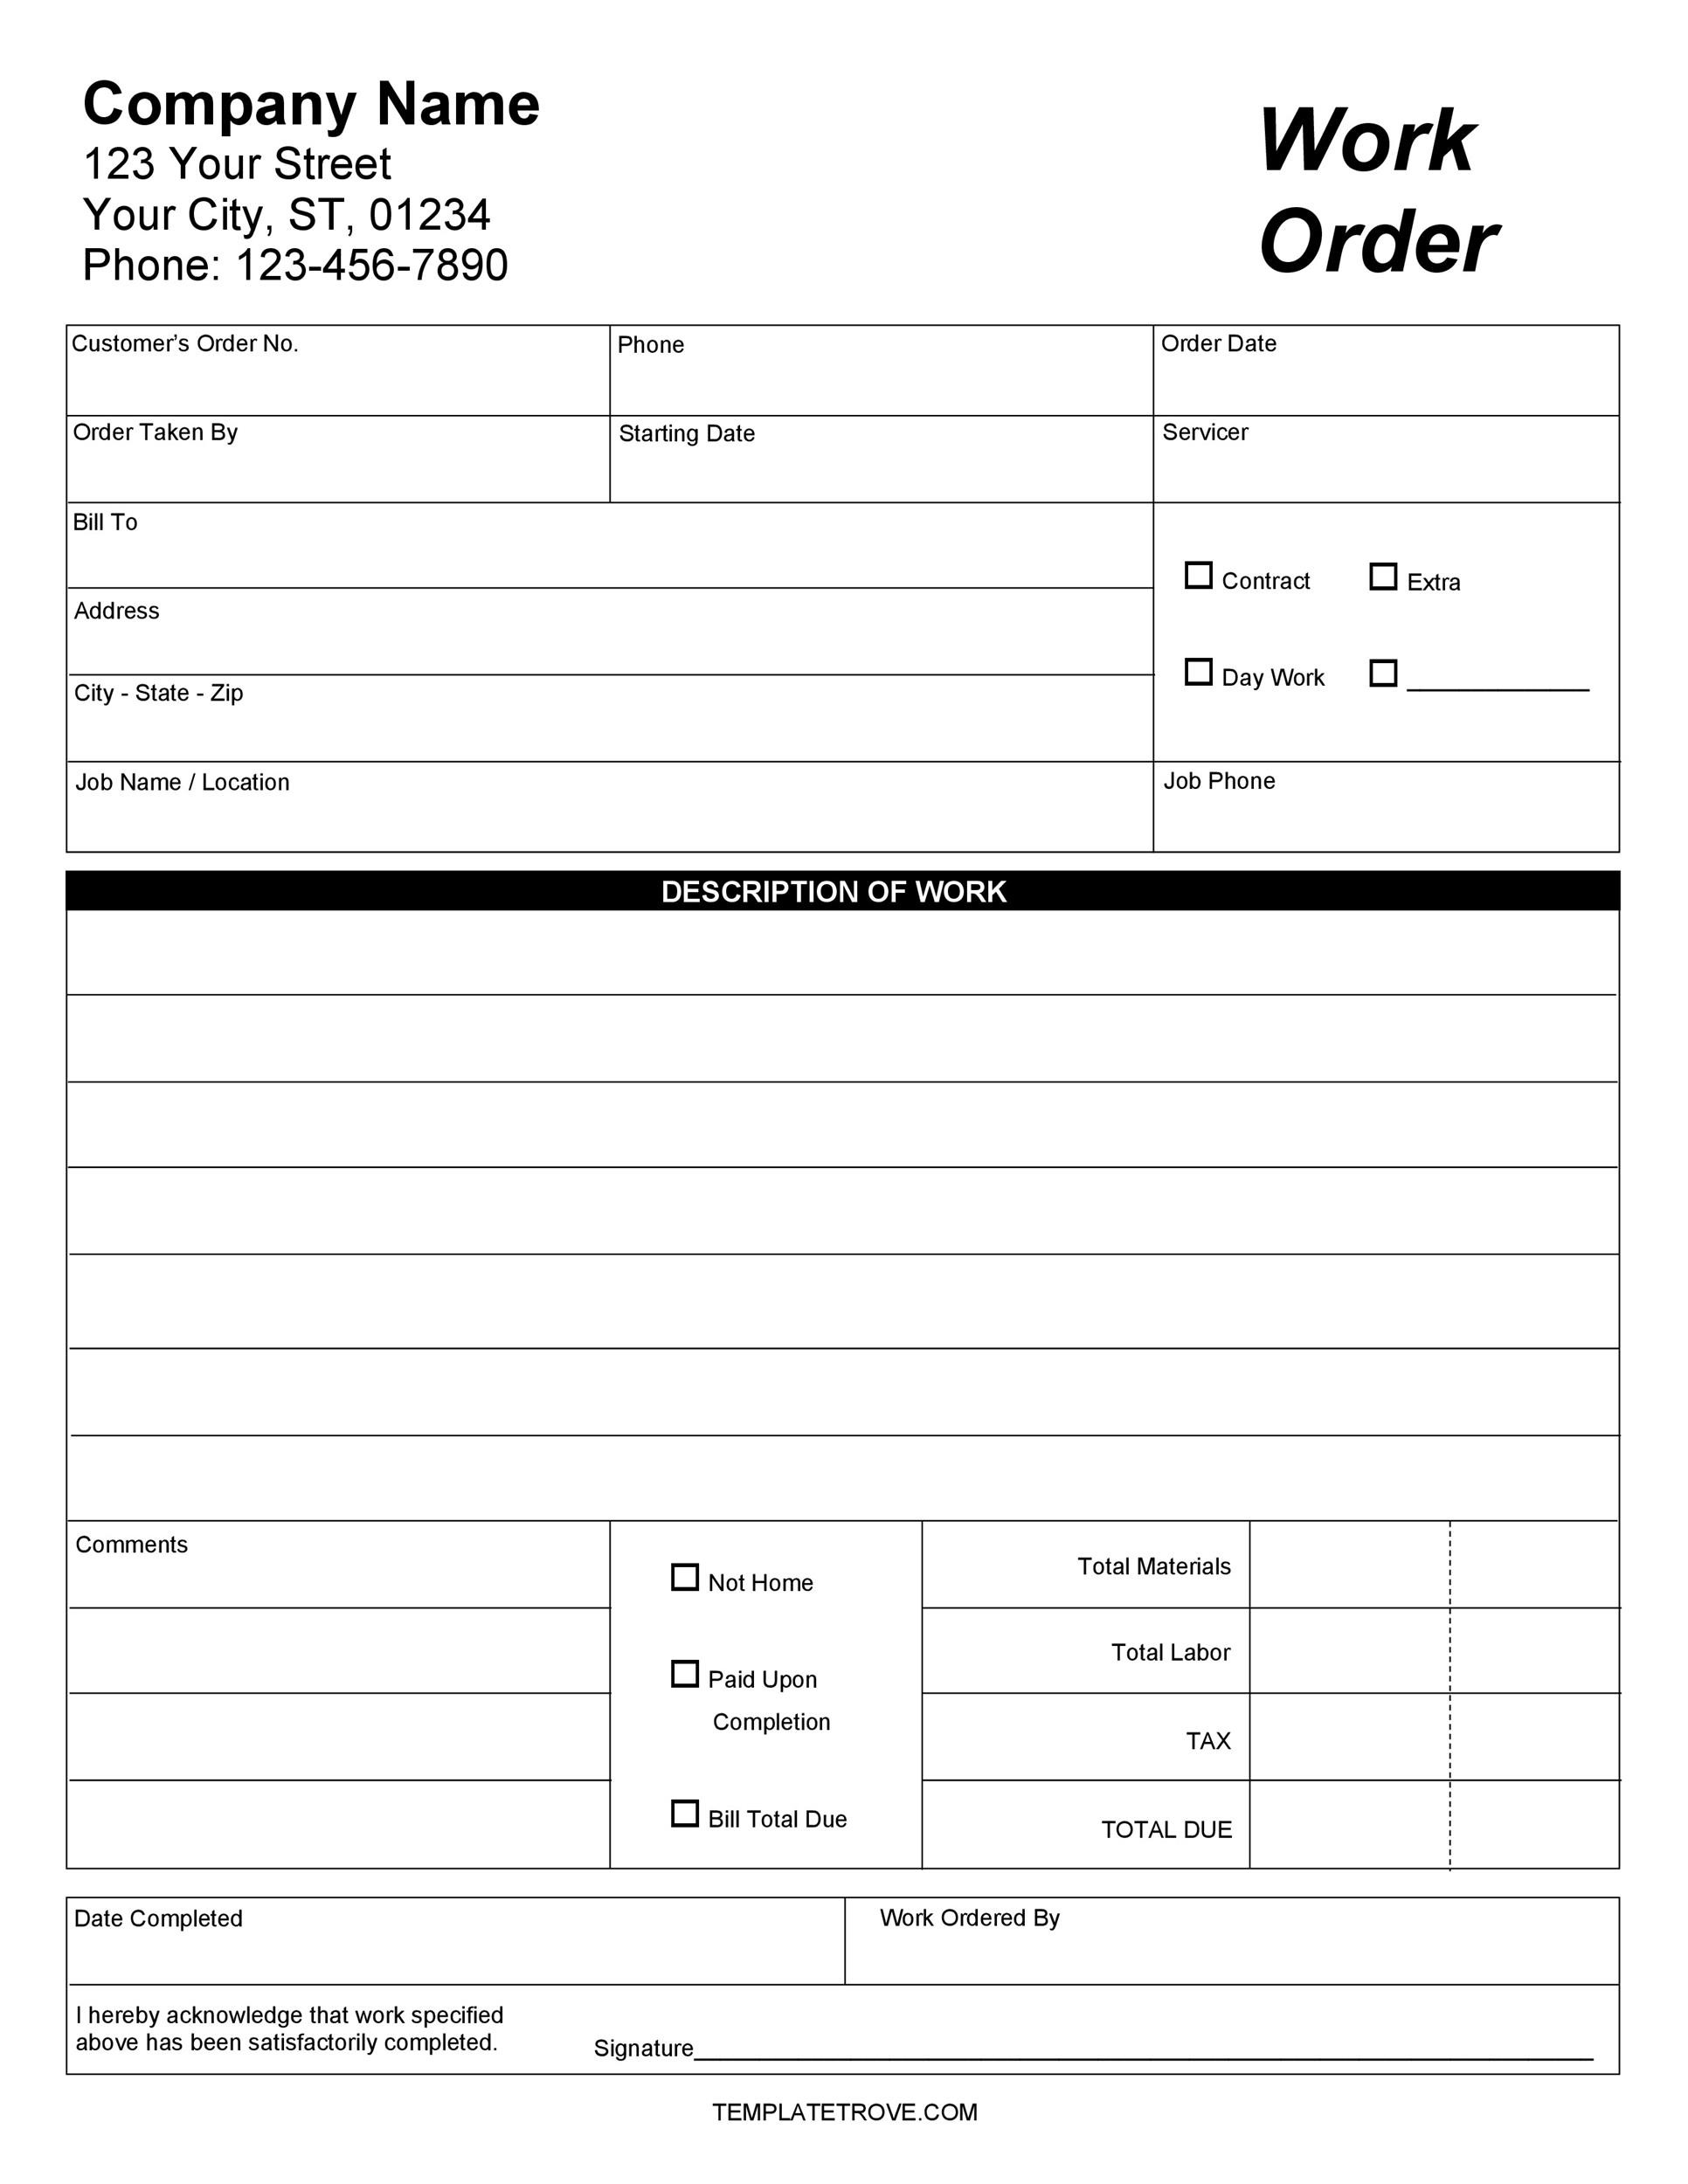 free-9-sample-work-order-forms-in-ms-word-pdf-order-form-template-19